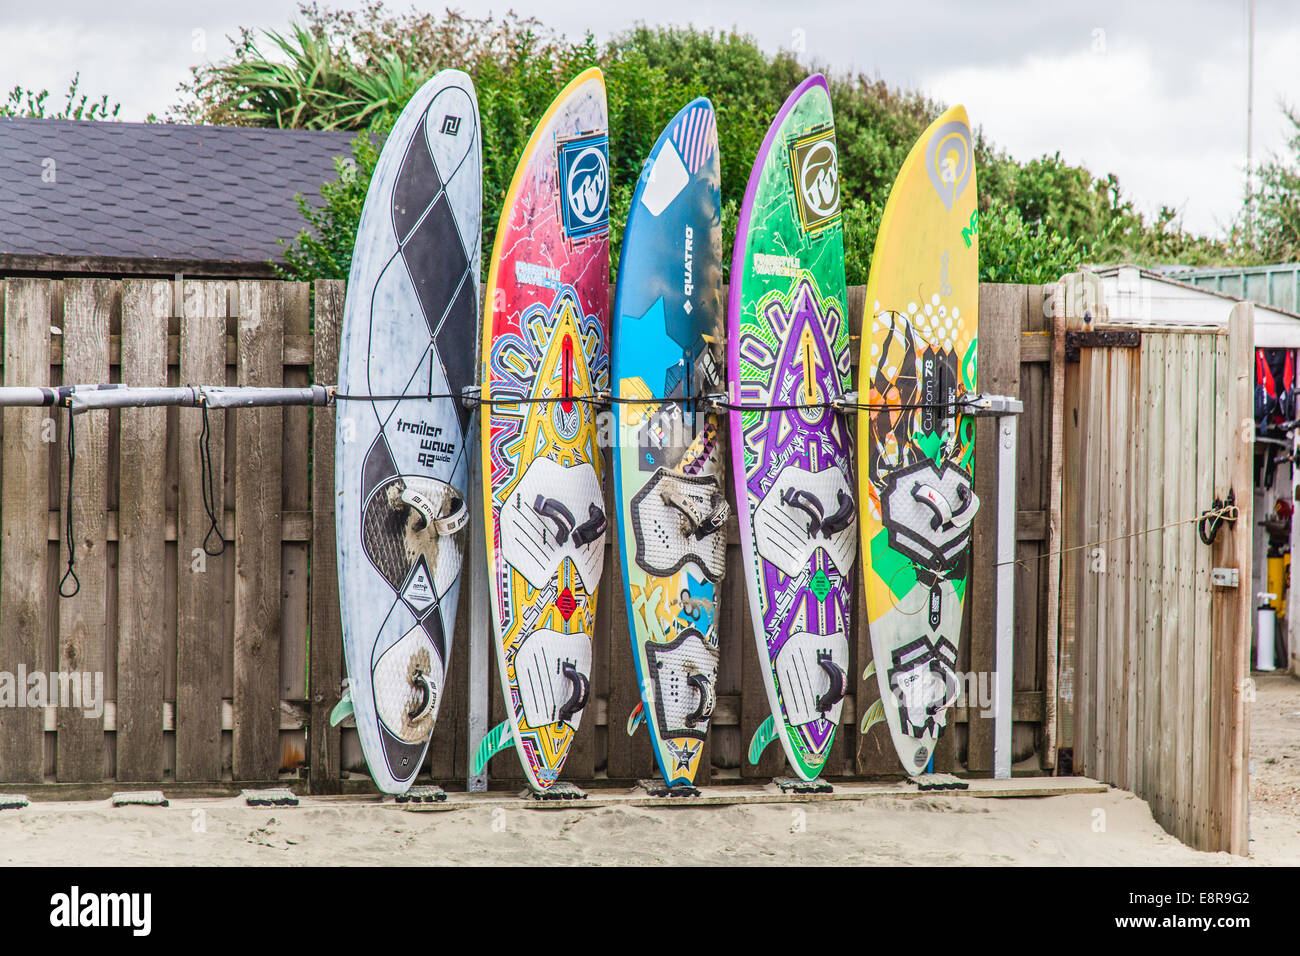 Windsurfing boards for hire at West Wittering beach, West Sussex, England, United Kingdom. Stock Photo